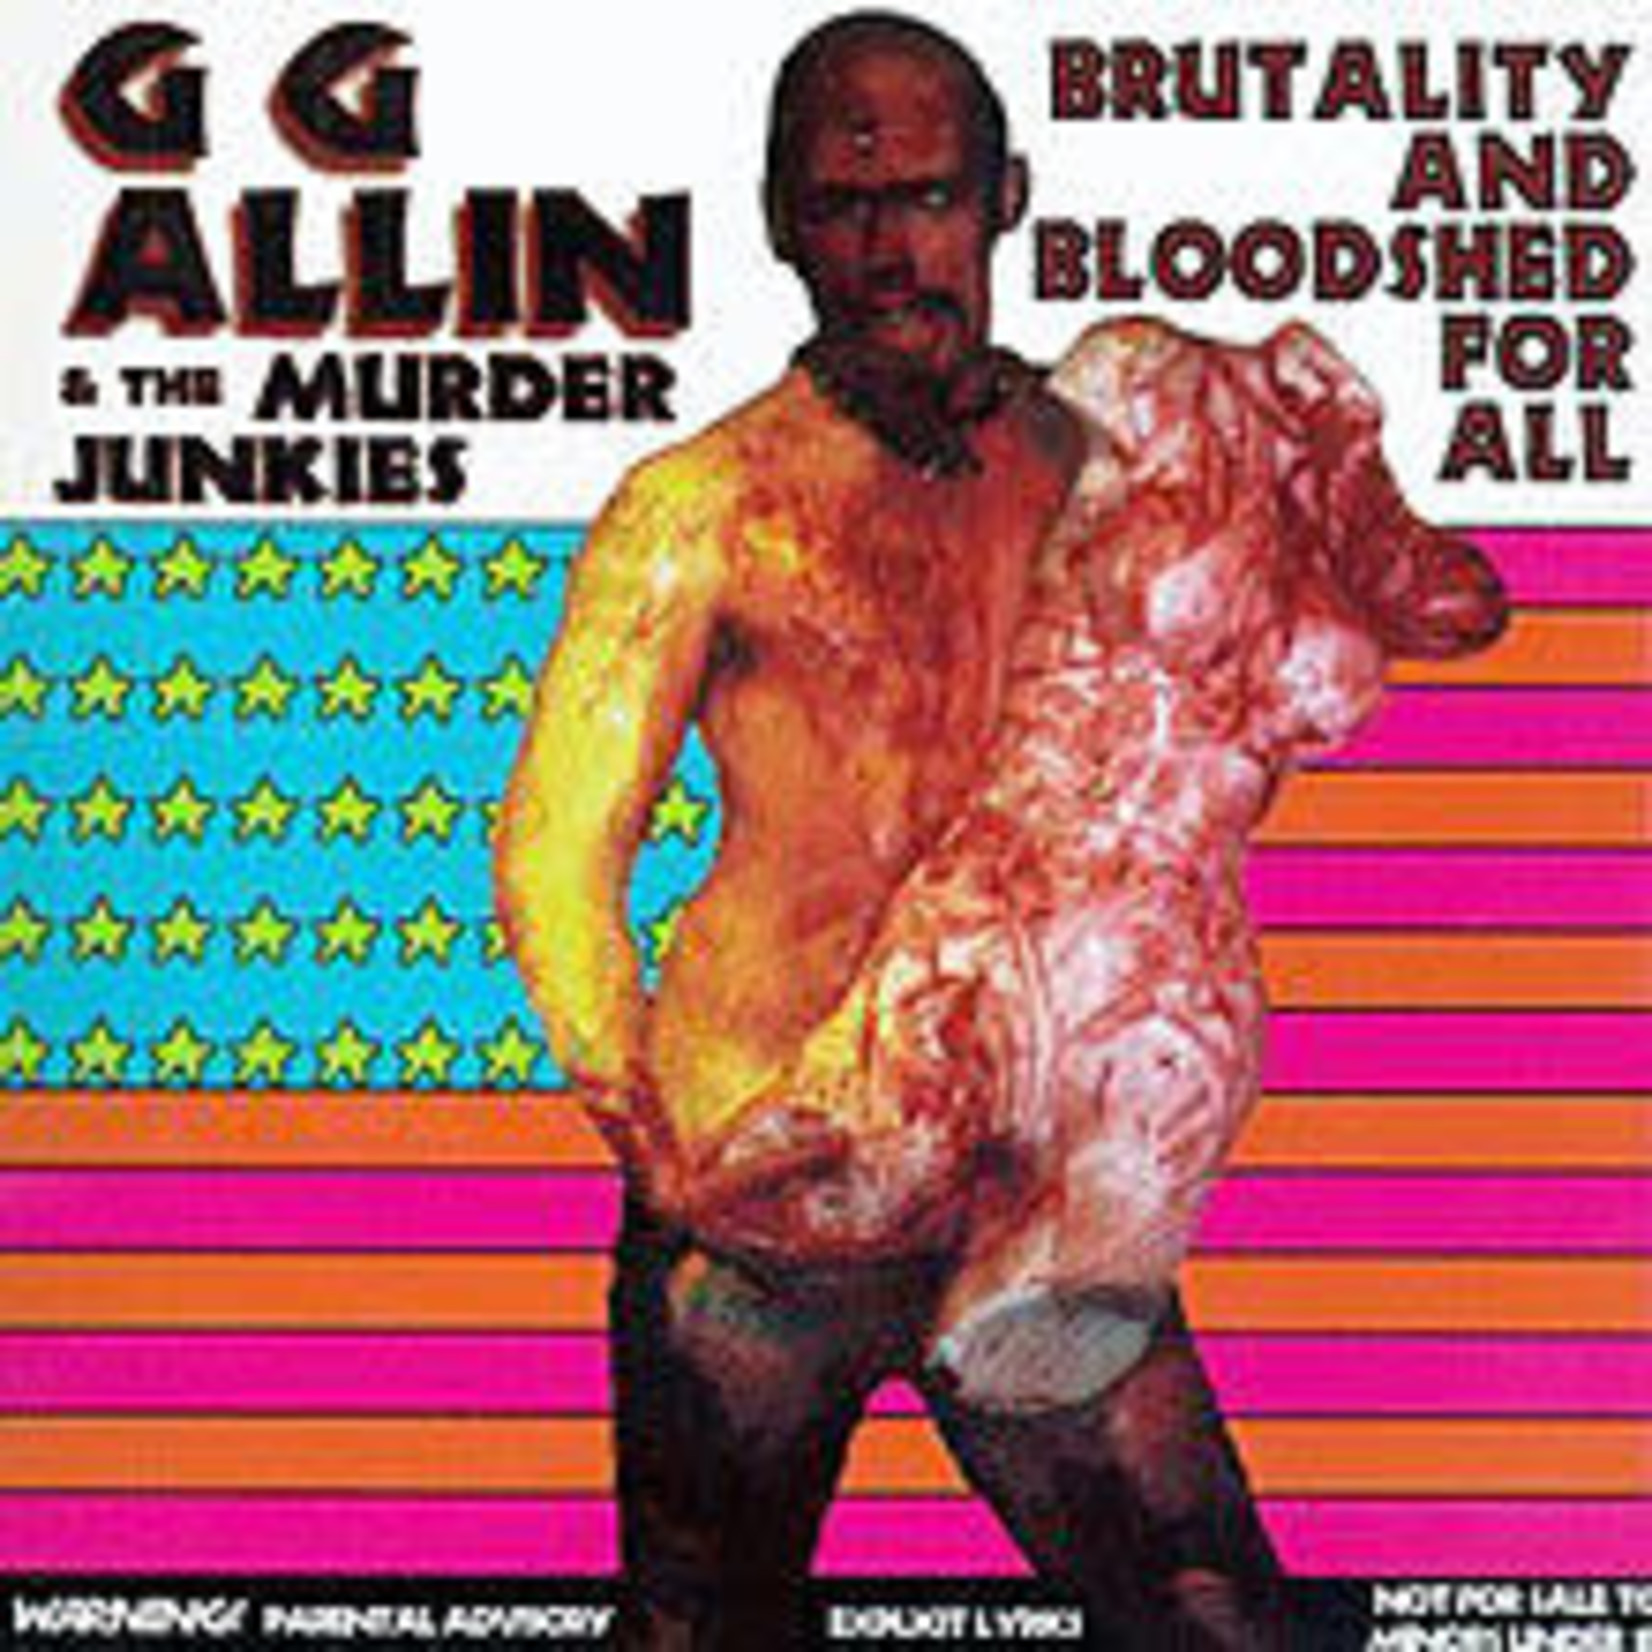 [New] GG & The Murder Junkies Allin - Brutality & Bloodshed For All